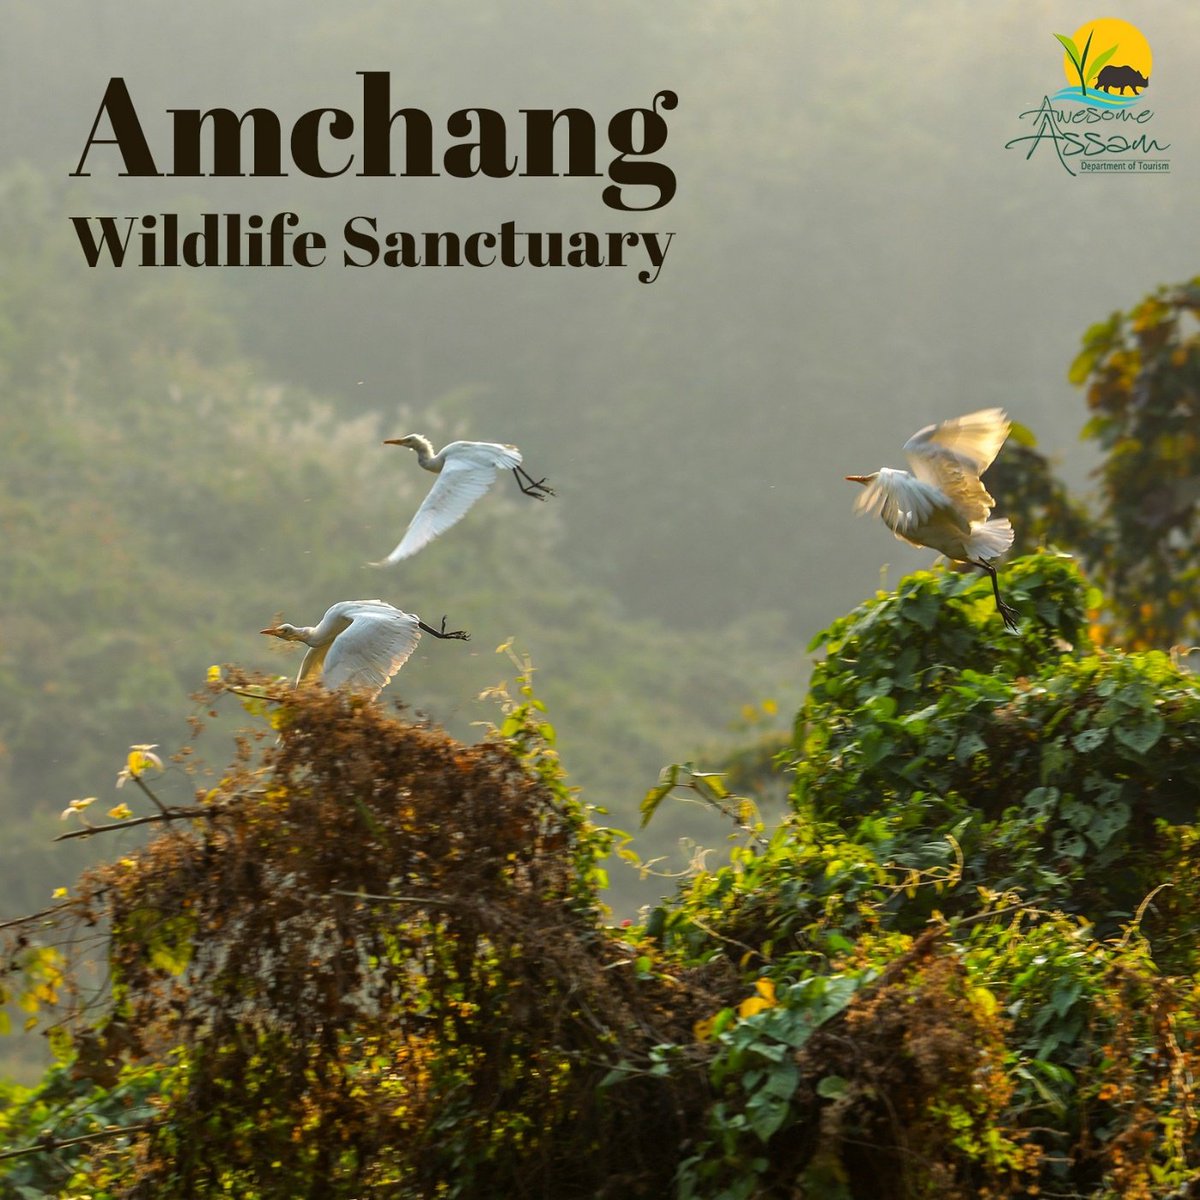 Amchang Wildlife Sanctuary on the outskirts of Guwahati is a perfect escape from the hustle and bustle of the city. Many wildlife species are found here which will give you an ethereal experience. #AwesomeAssam #AssamTourism #FeralHorses #DibruSaikhowaNationalPark #WildLife…